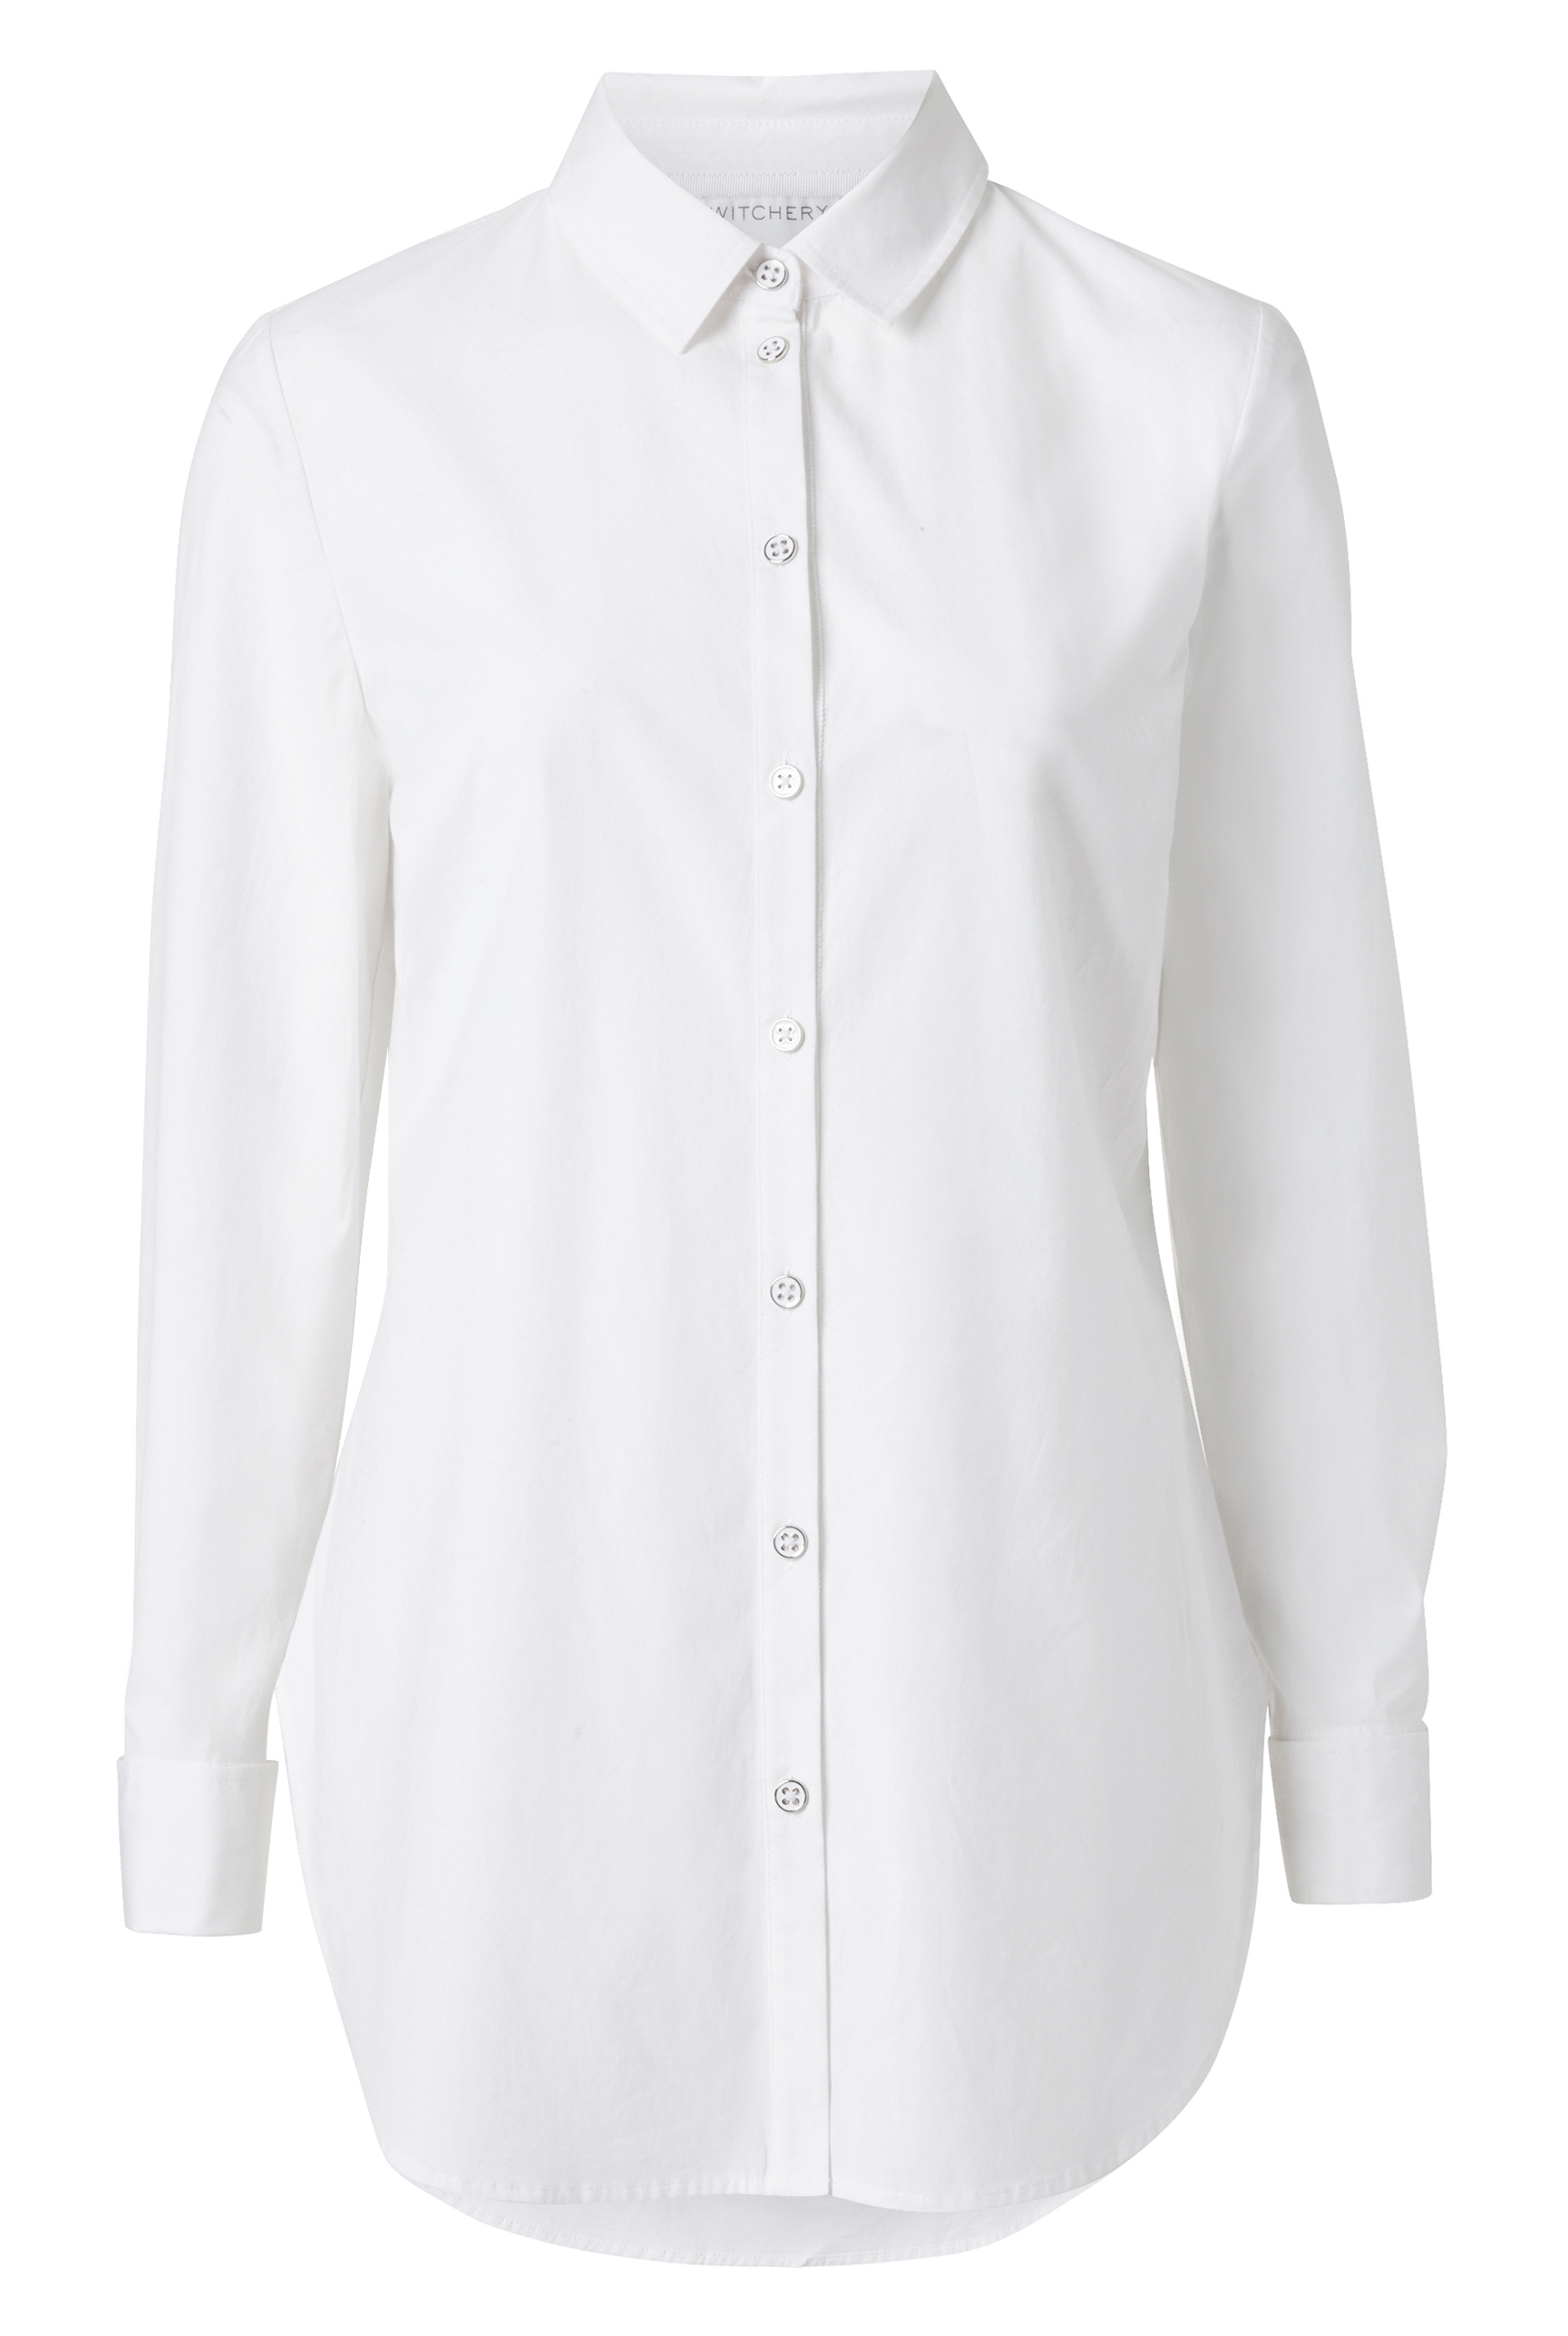 Witchery OCRF White Shirt Campaign 2017 - Apparel